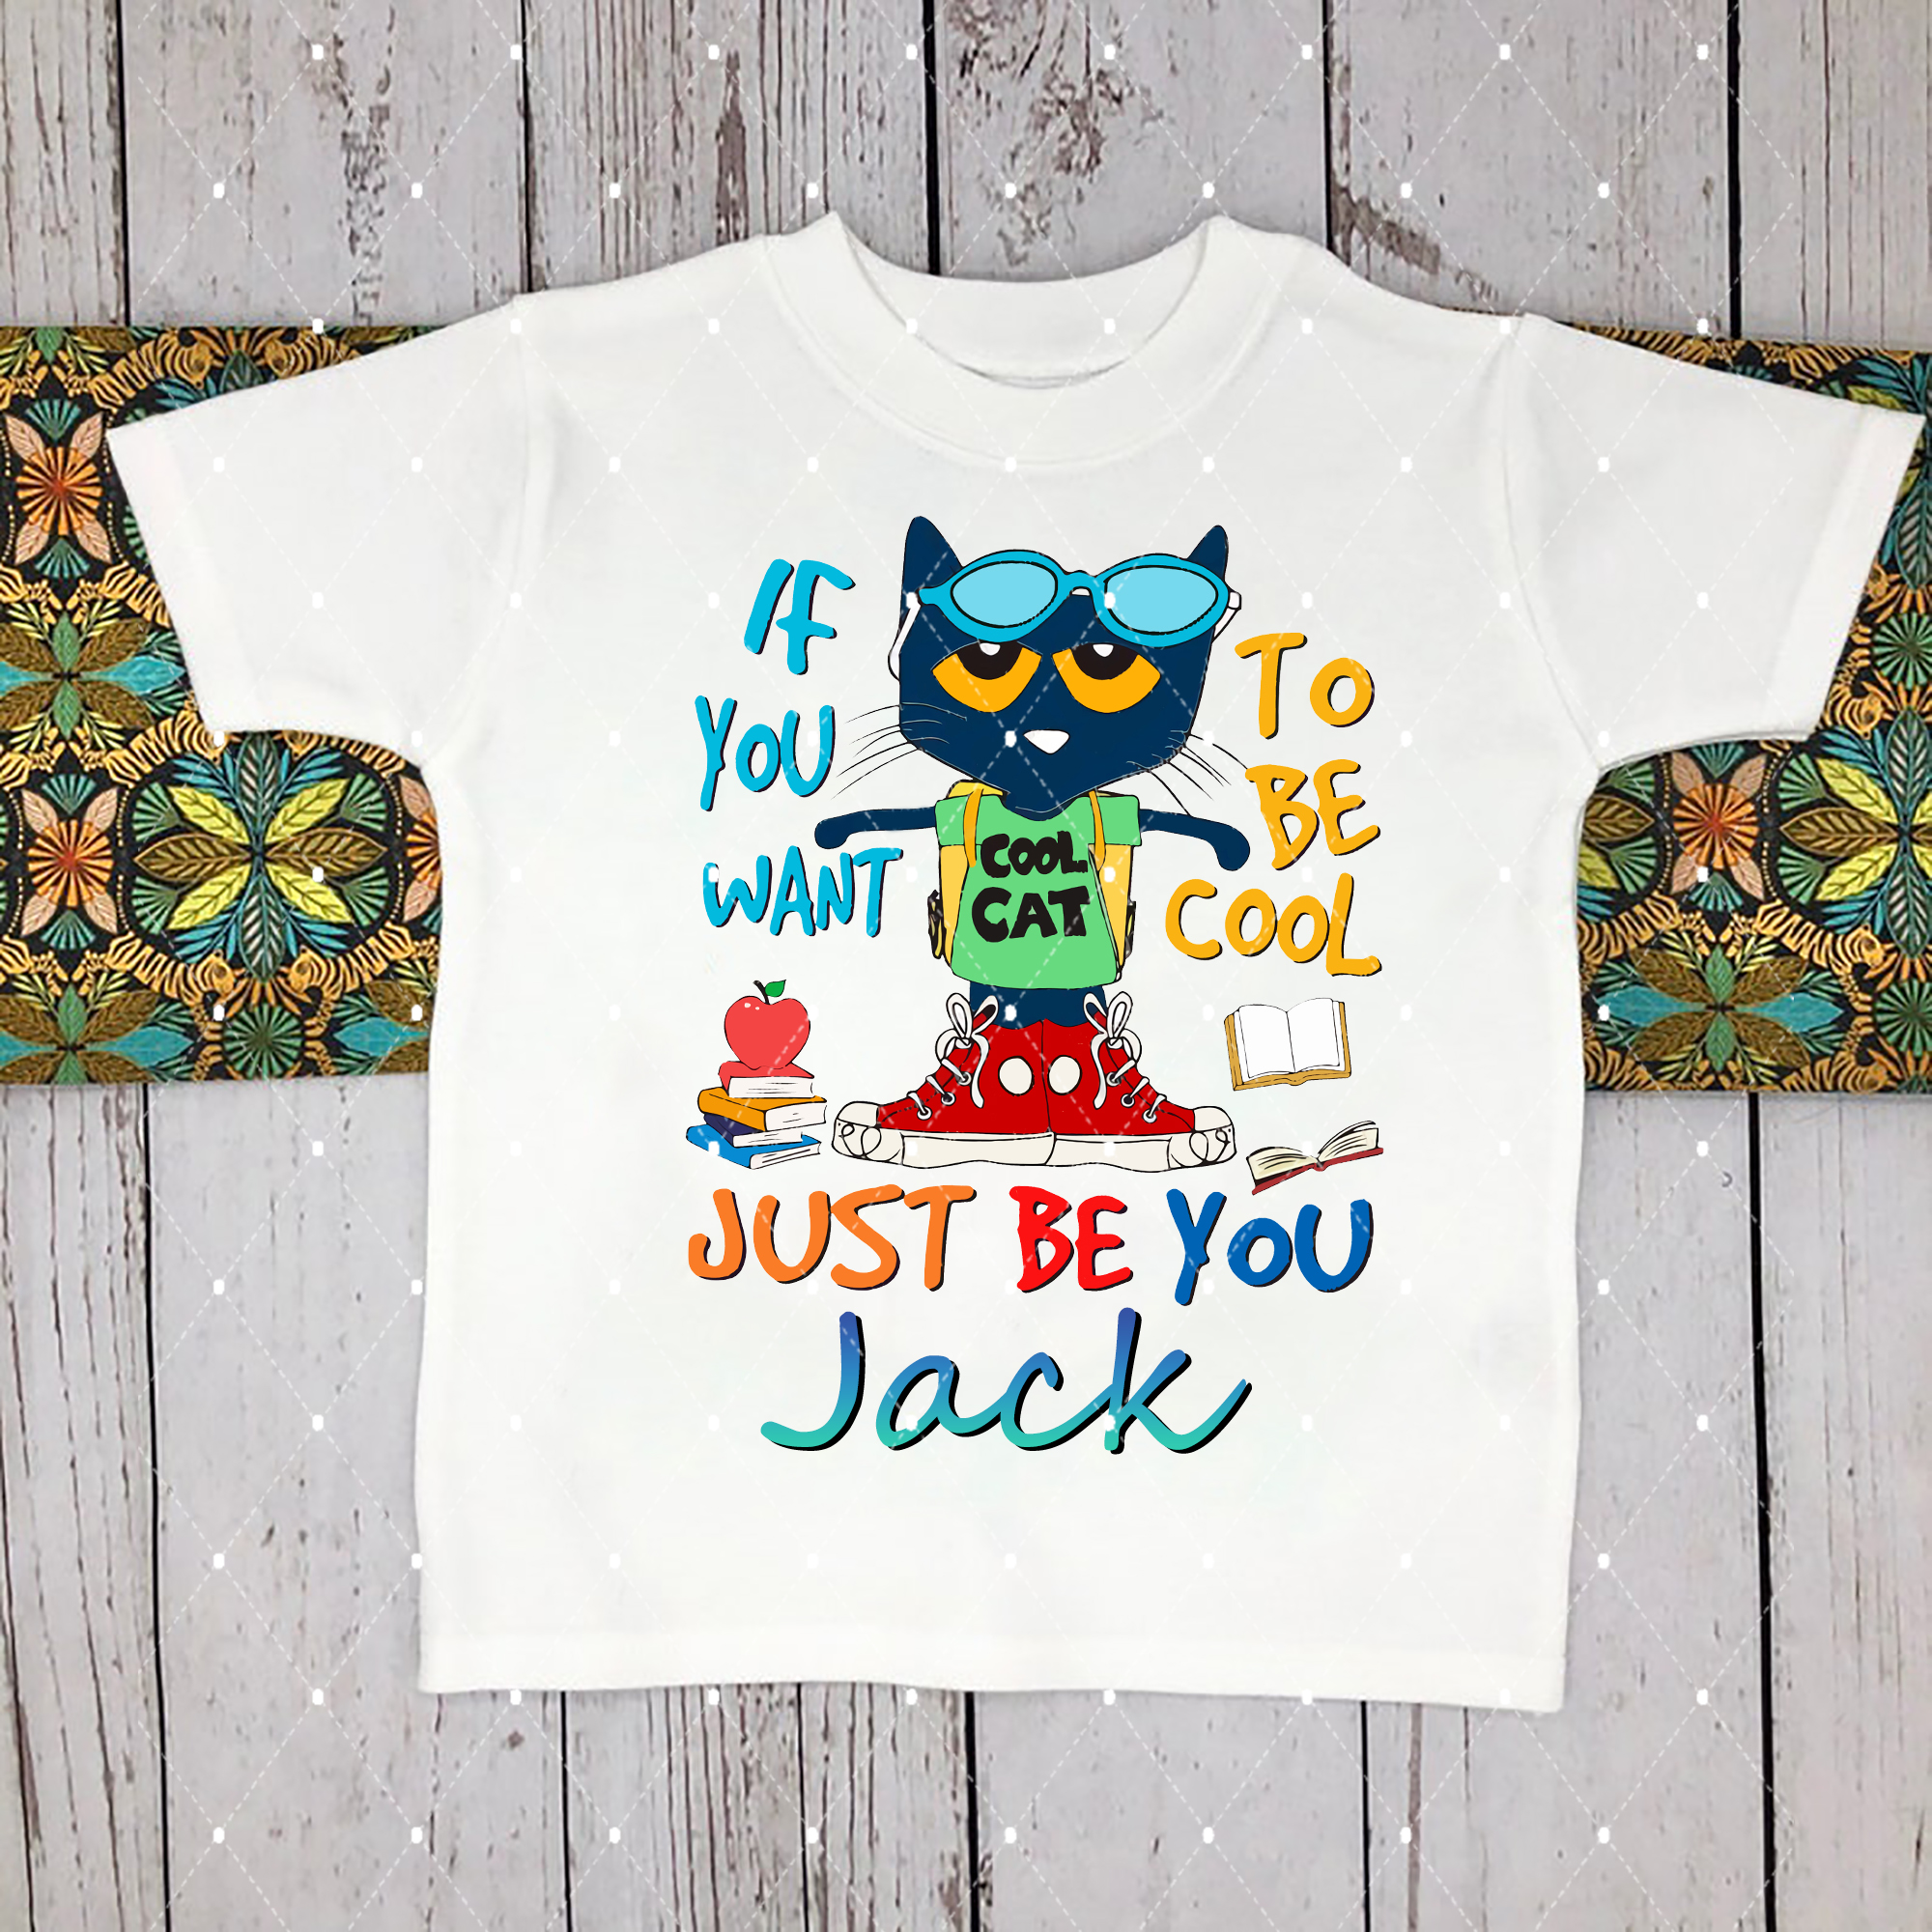 Personalized Pete The Cat Shirt, Pete The Cat Birthday Shirt, Groovy Family Shirt, If You Want To Be Cool Just Be You